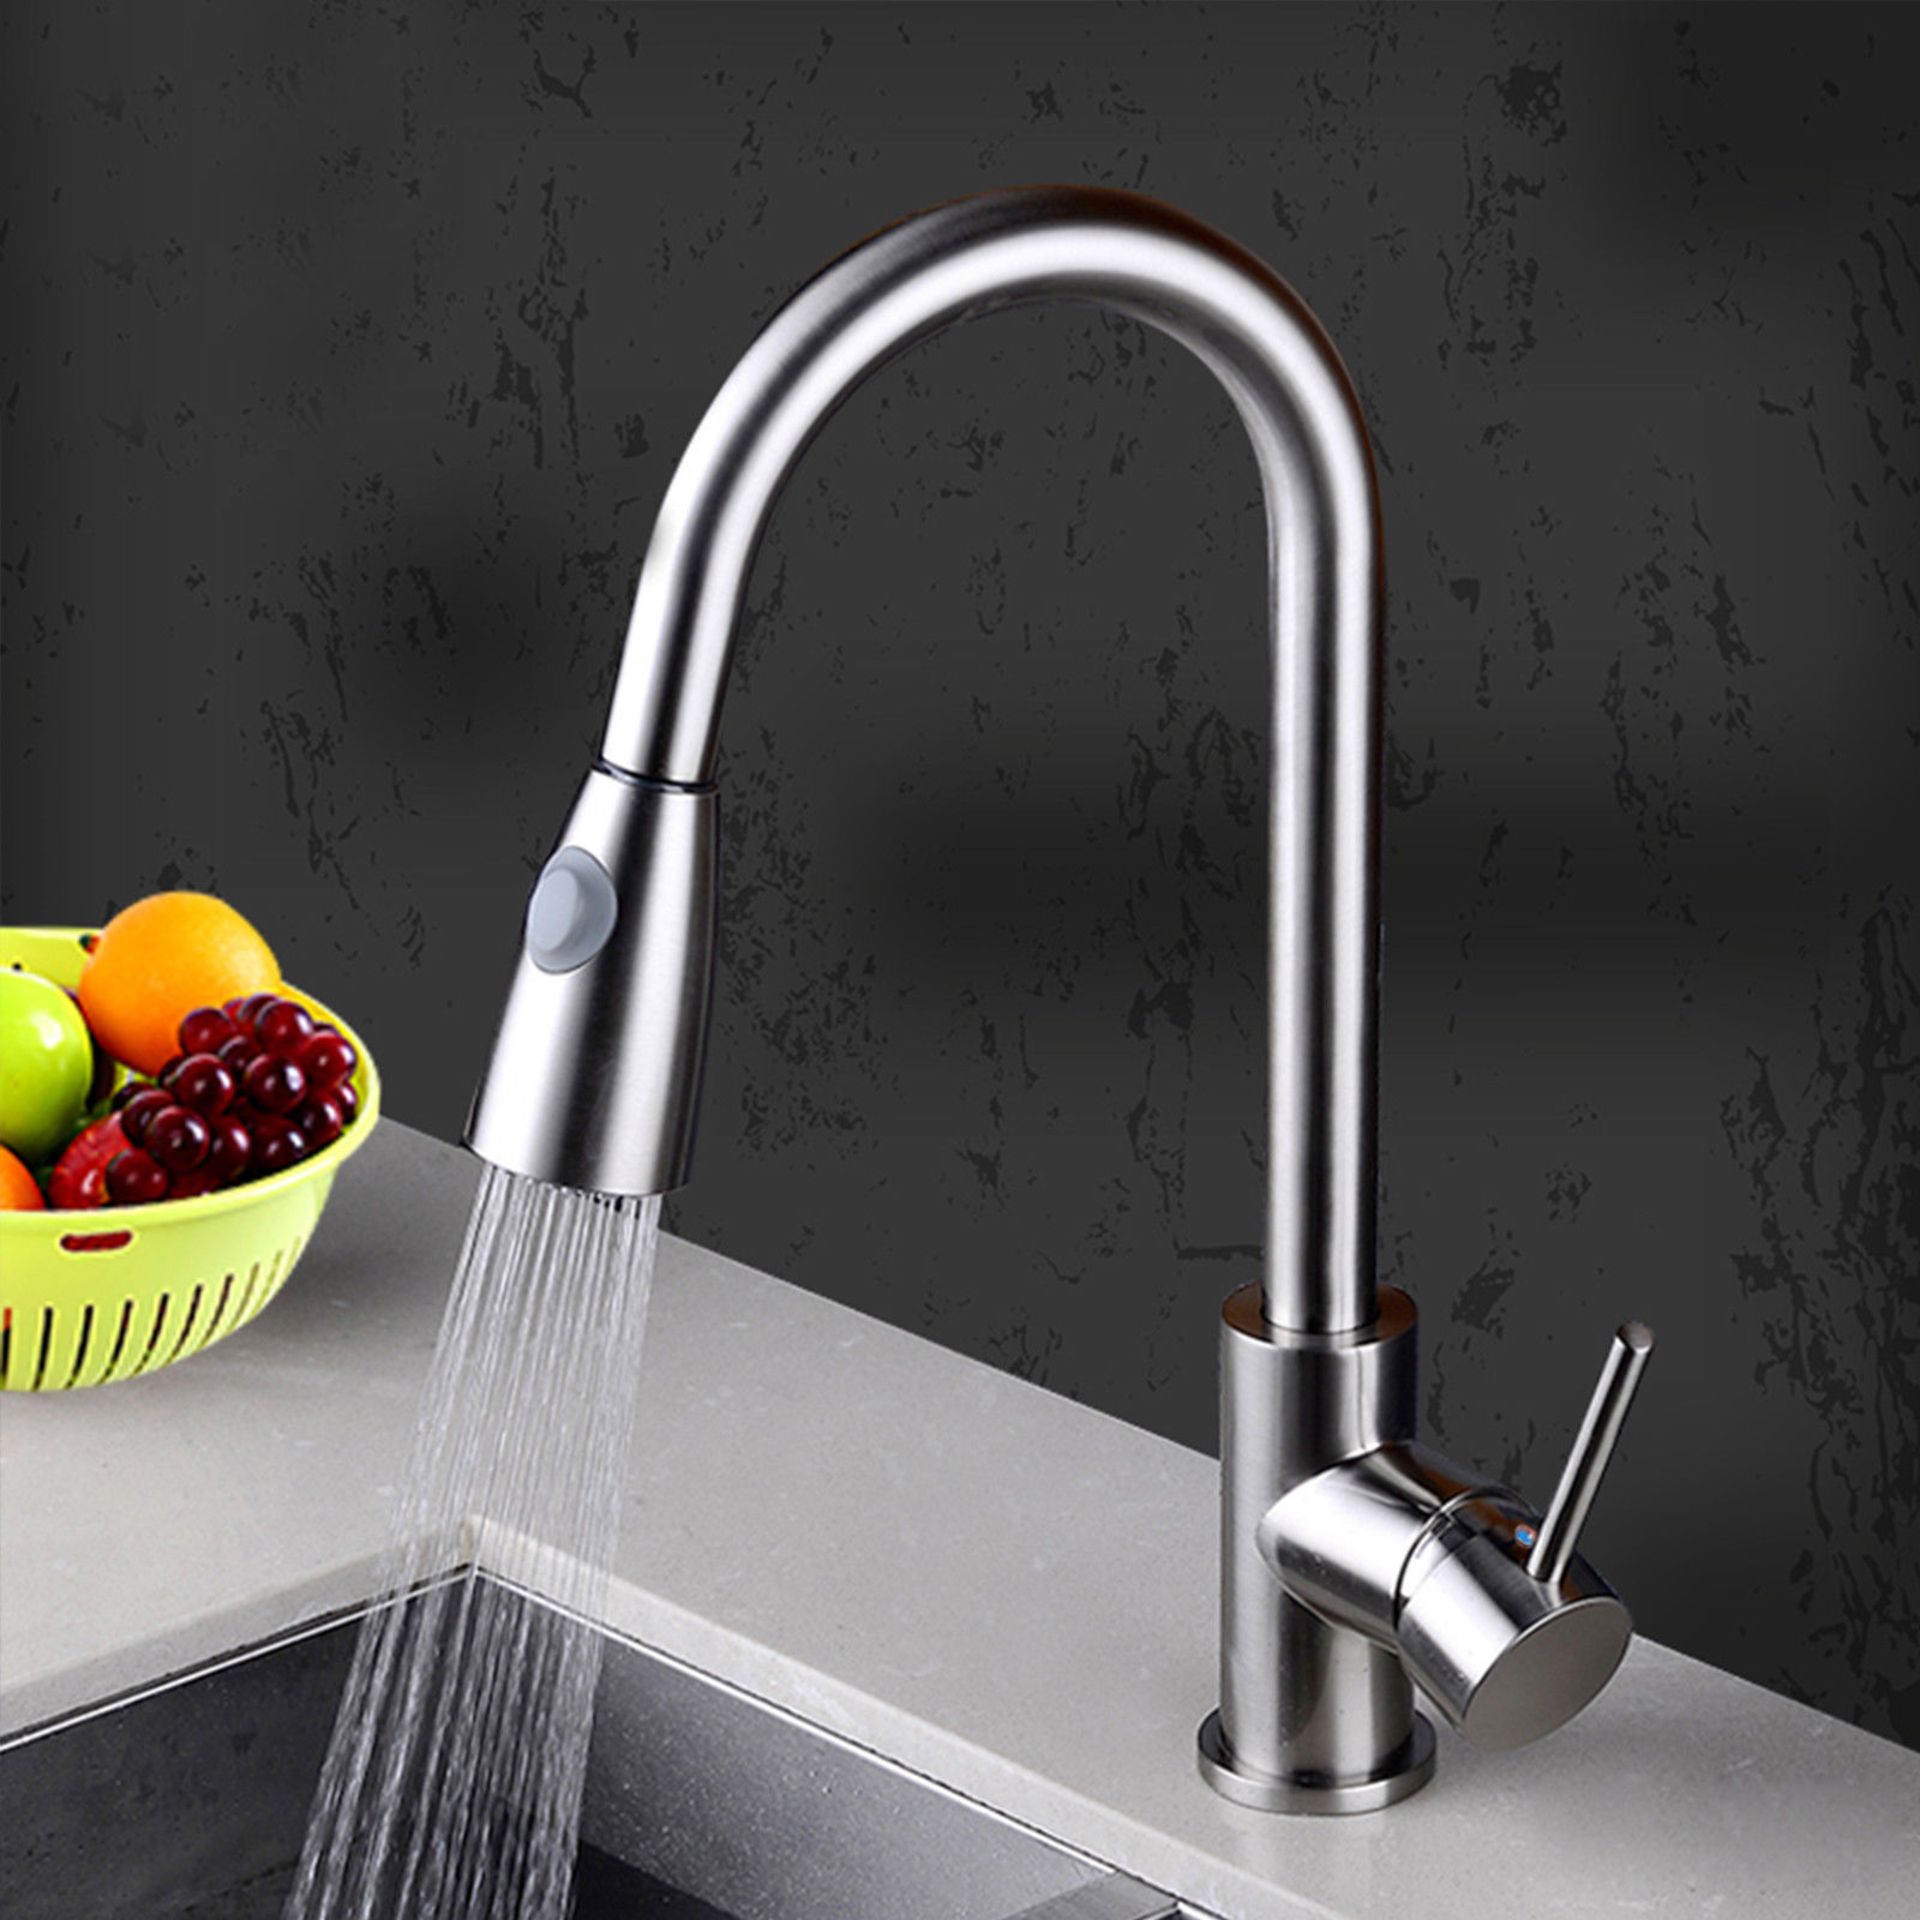 (P271) Della Modern Monobloc Chrome Brass Pull Out Spray Mixer Tap. RRP £299.99. This tap is from